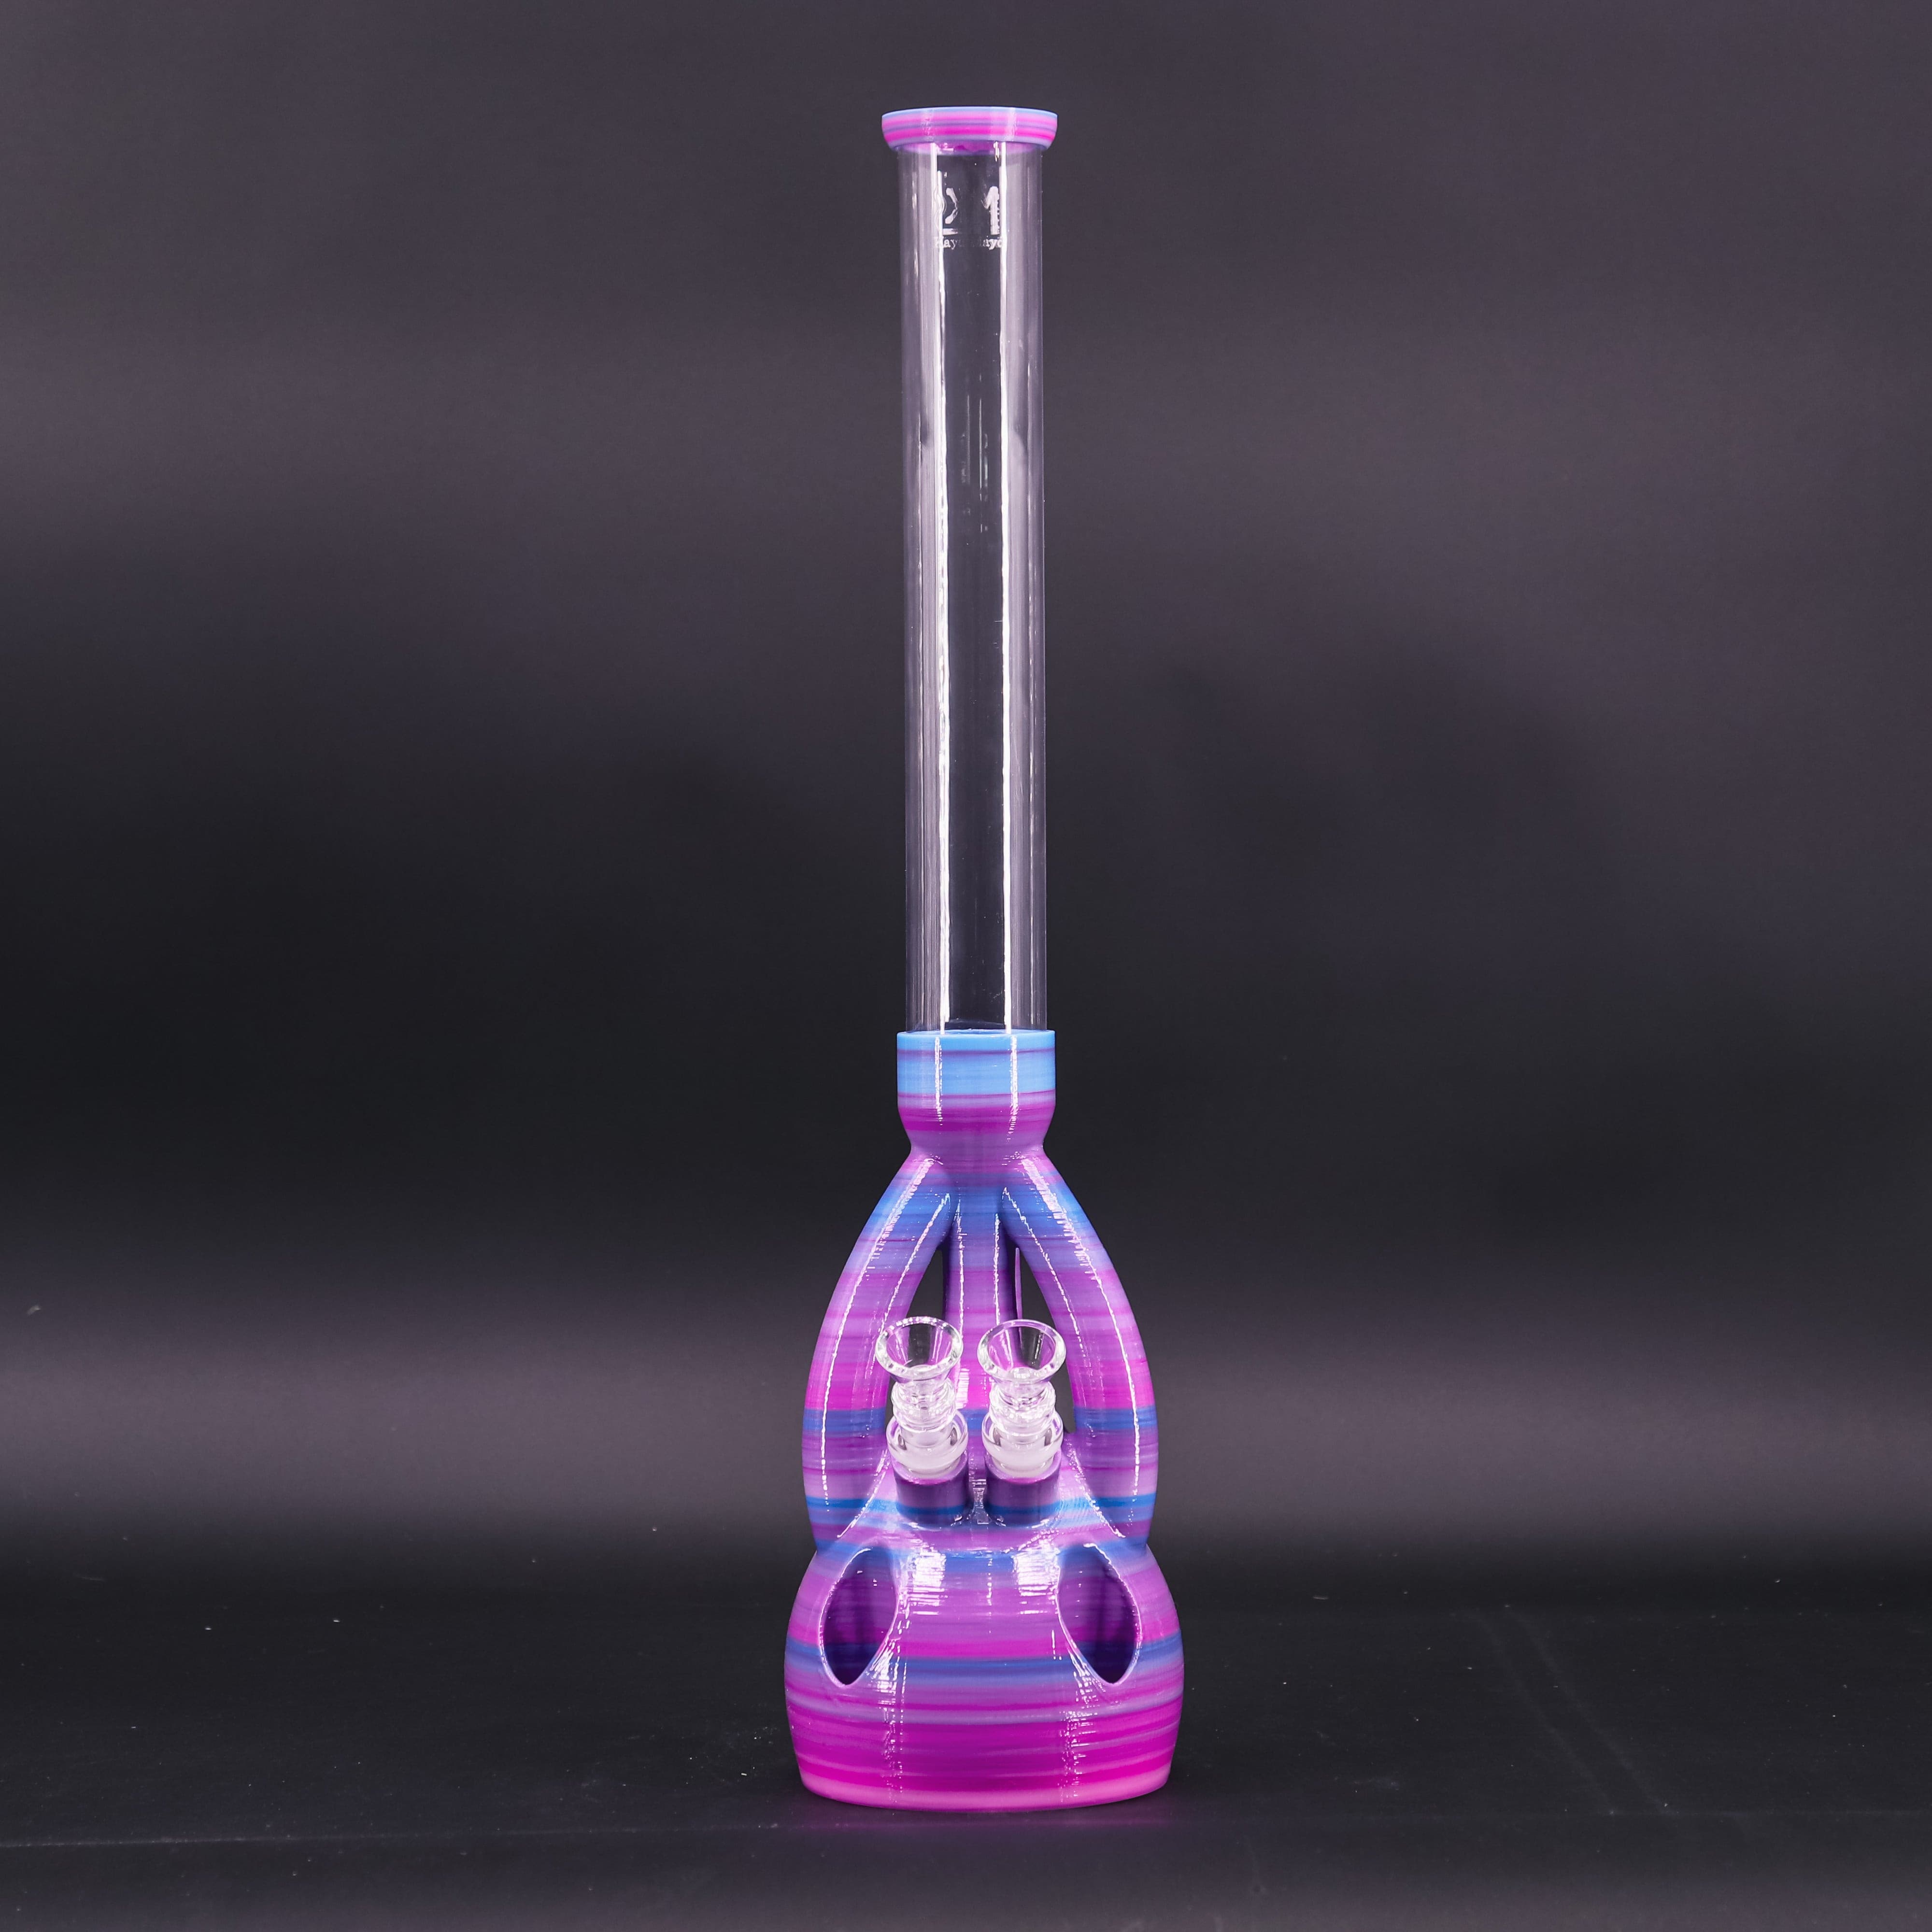 Electric Purple color of The Duo - Amazing 3D Printed Water Pipe by Kayd Mayd.